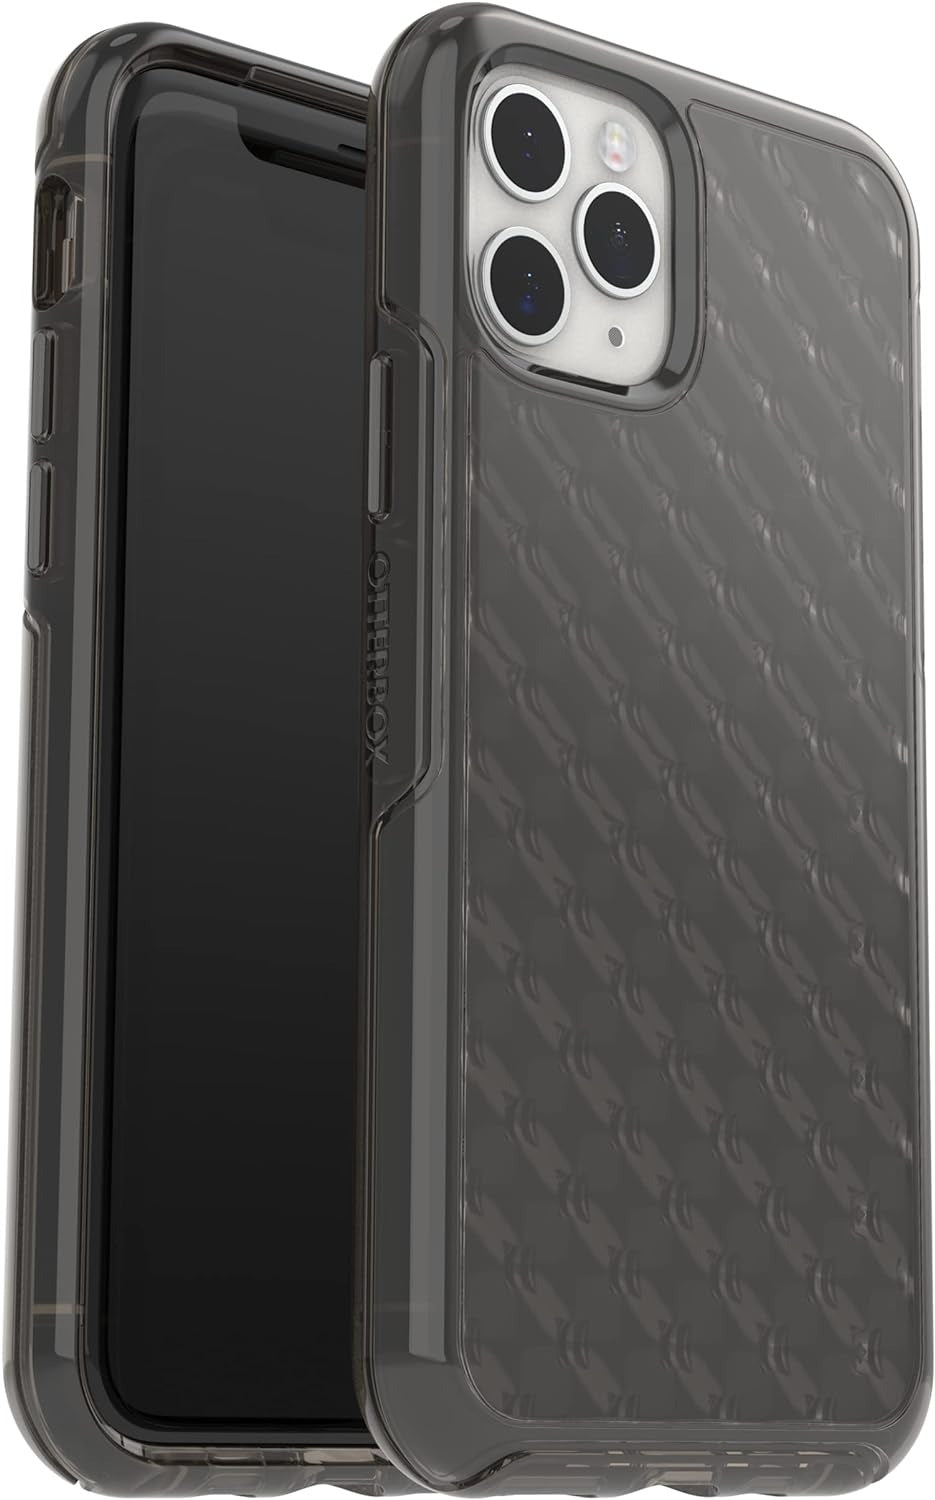 OtterBox VUE SERIES Case for Apple iPhone 11 Pro Max - Fog Black (Certified Refurbished)